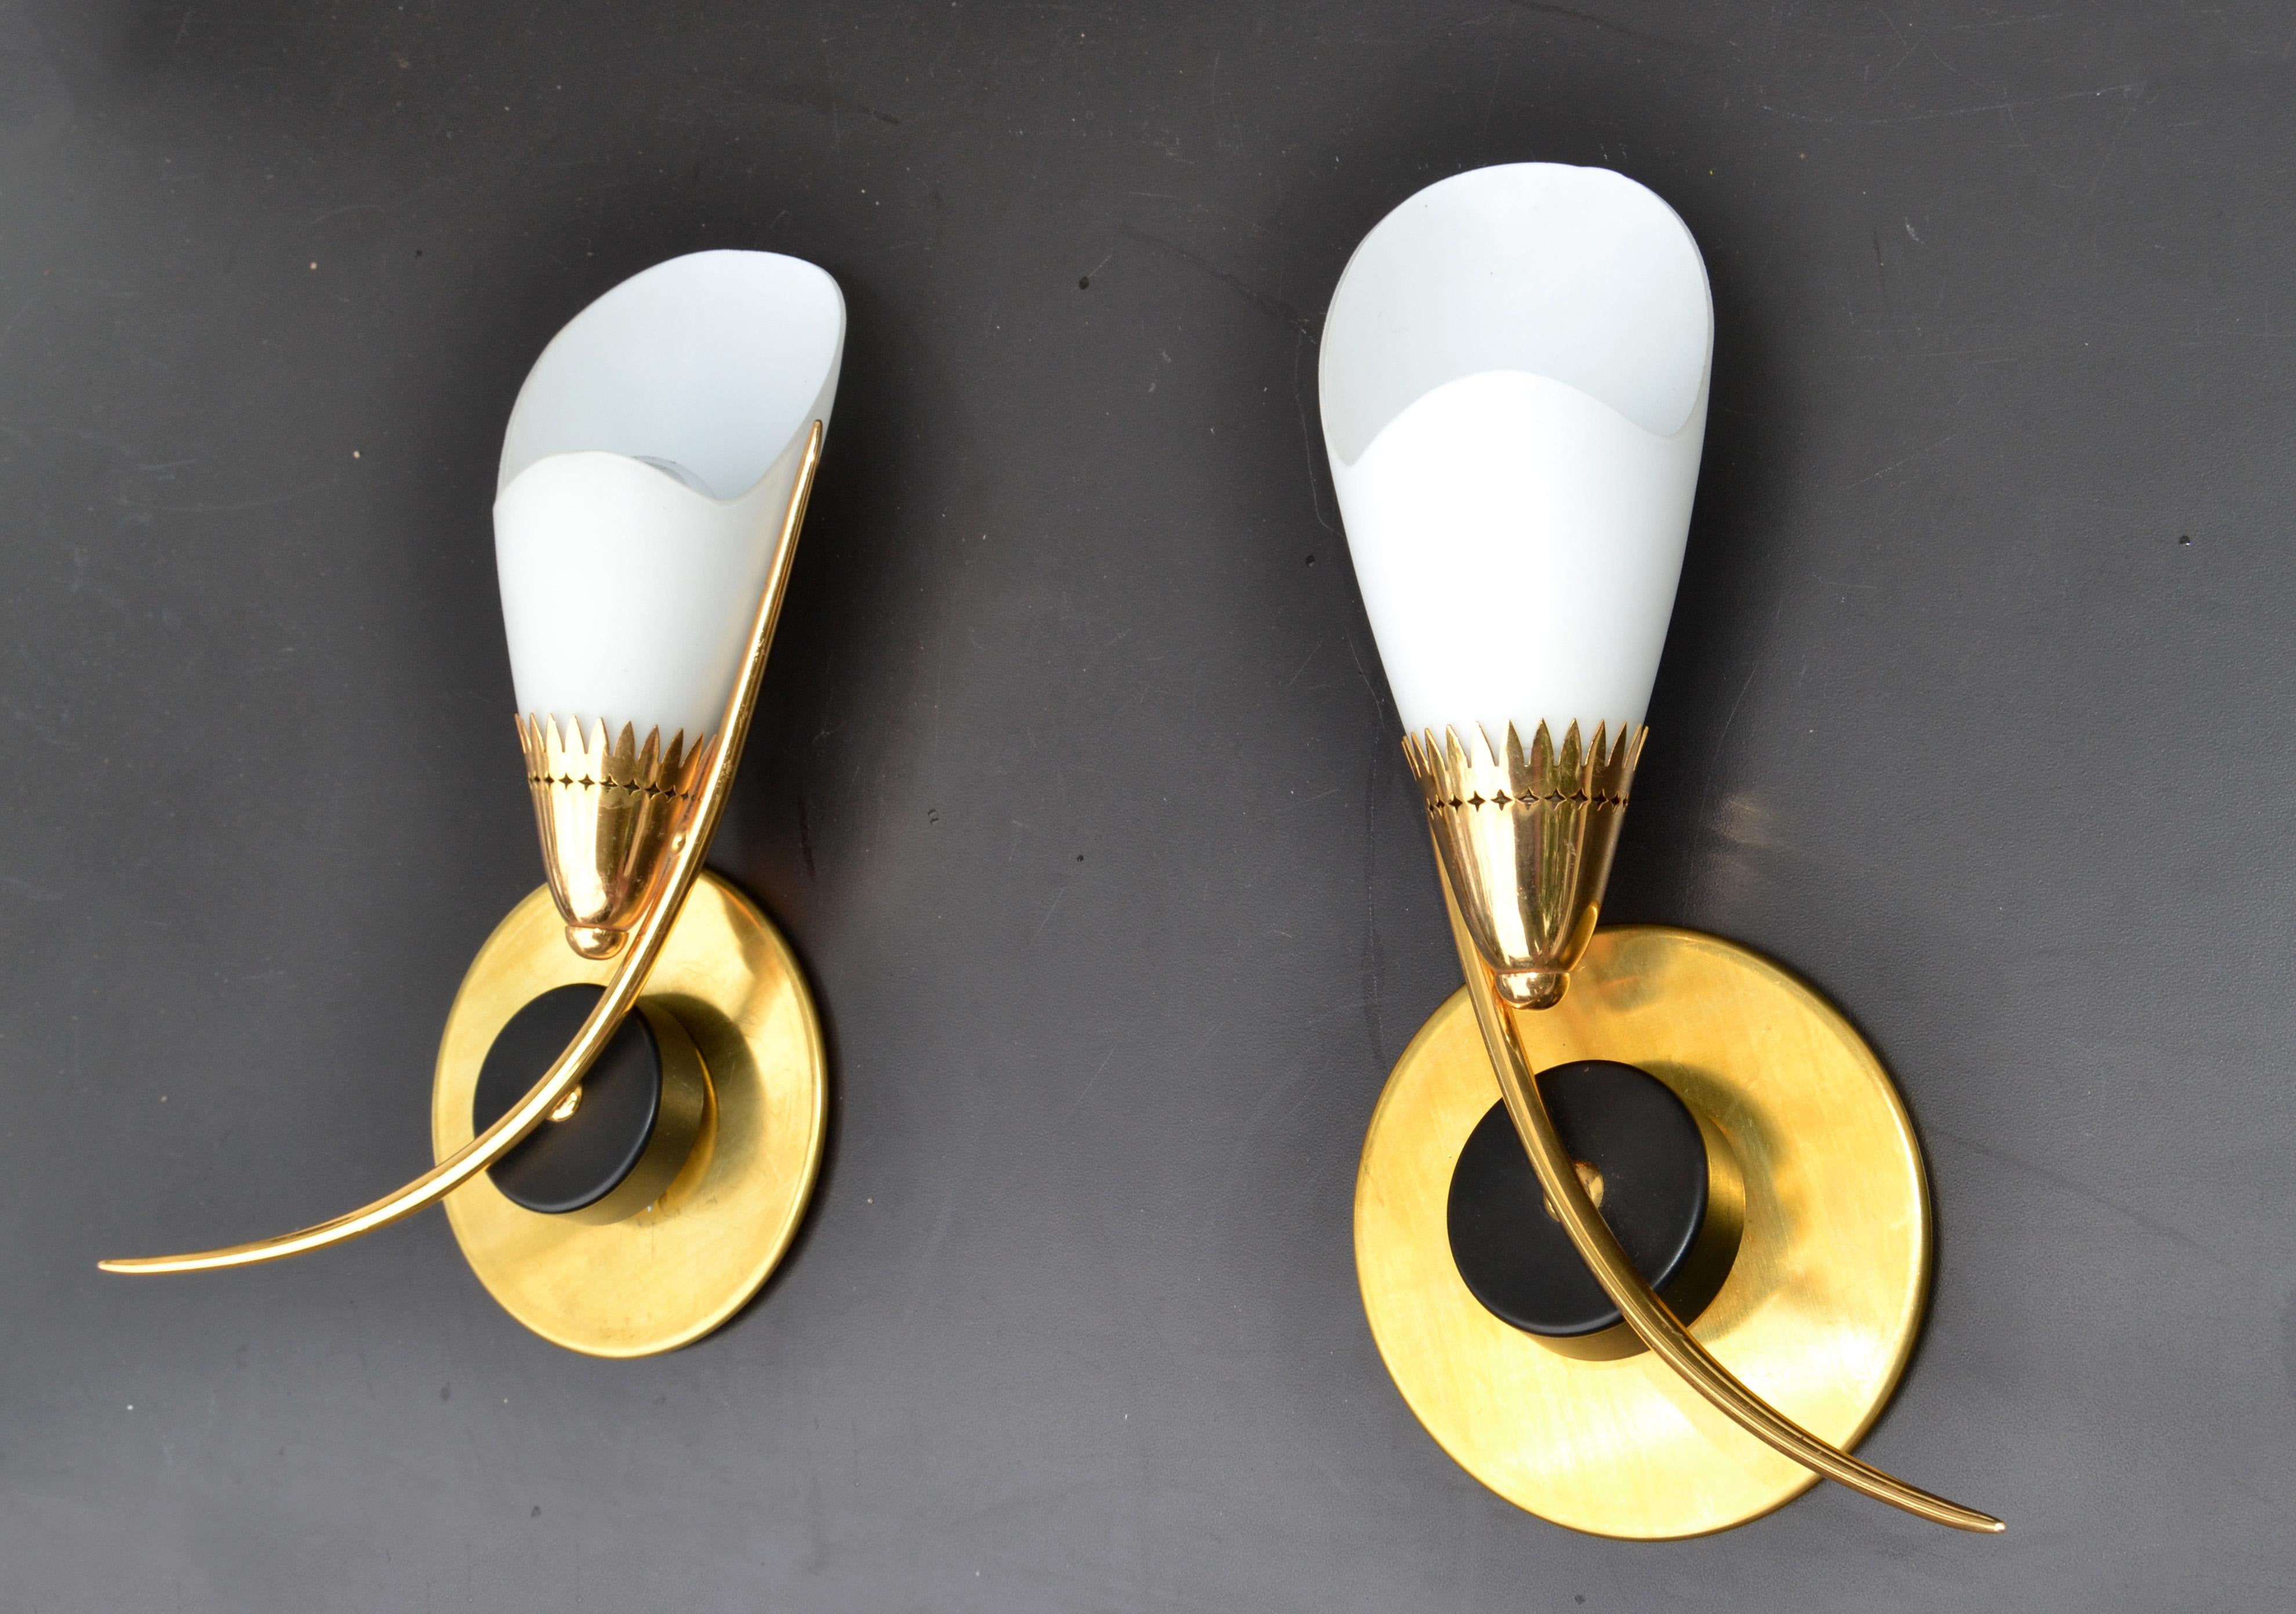 Maison Lunel Mirror Image Sconces Brass Steel & Opaline Shade France 1960, Pair For Sale 1